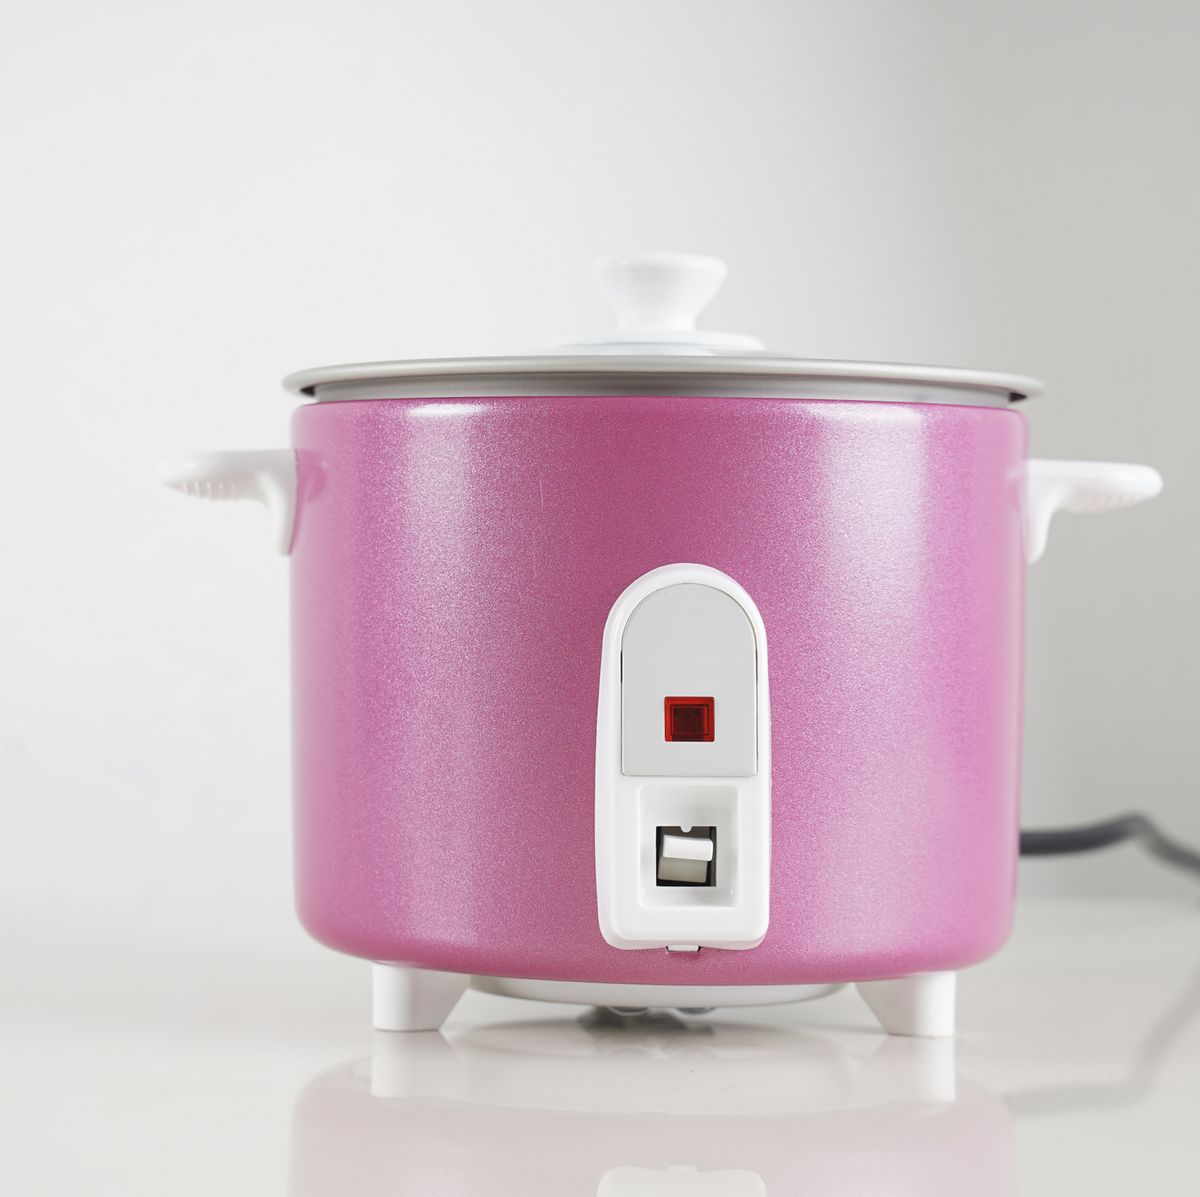 10 Surprising Foods You Can Prepare With a Rice Cooker